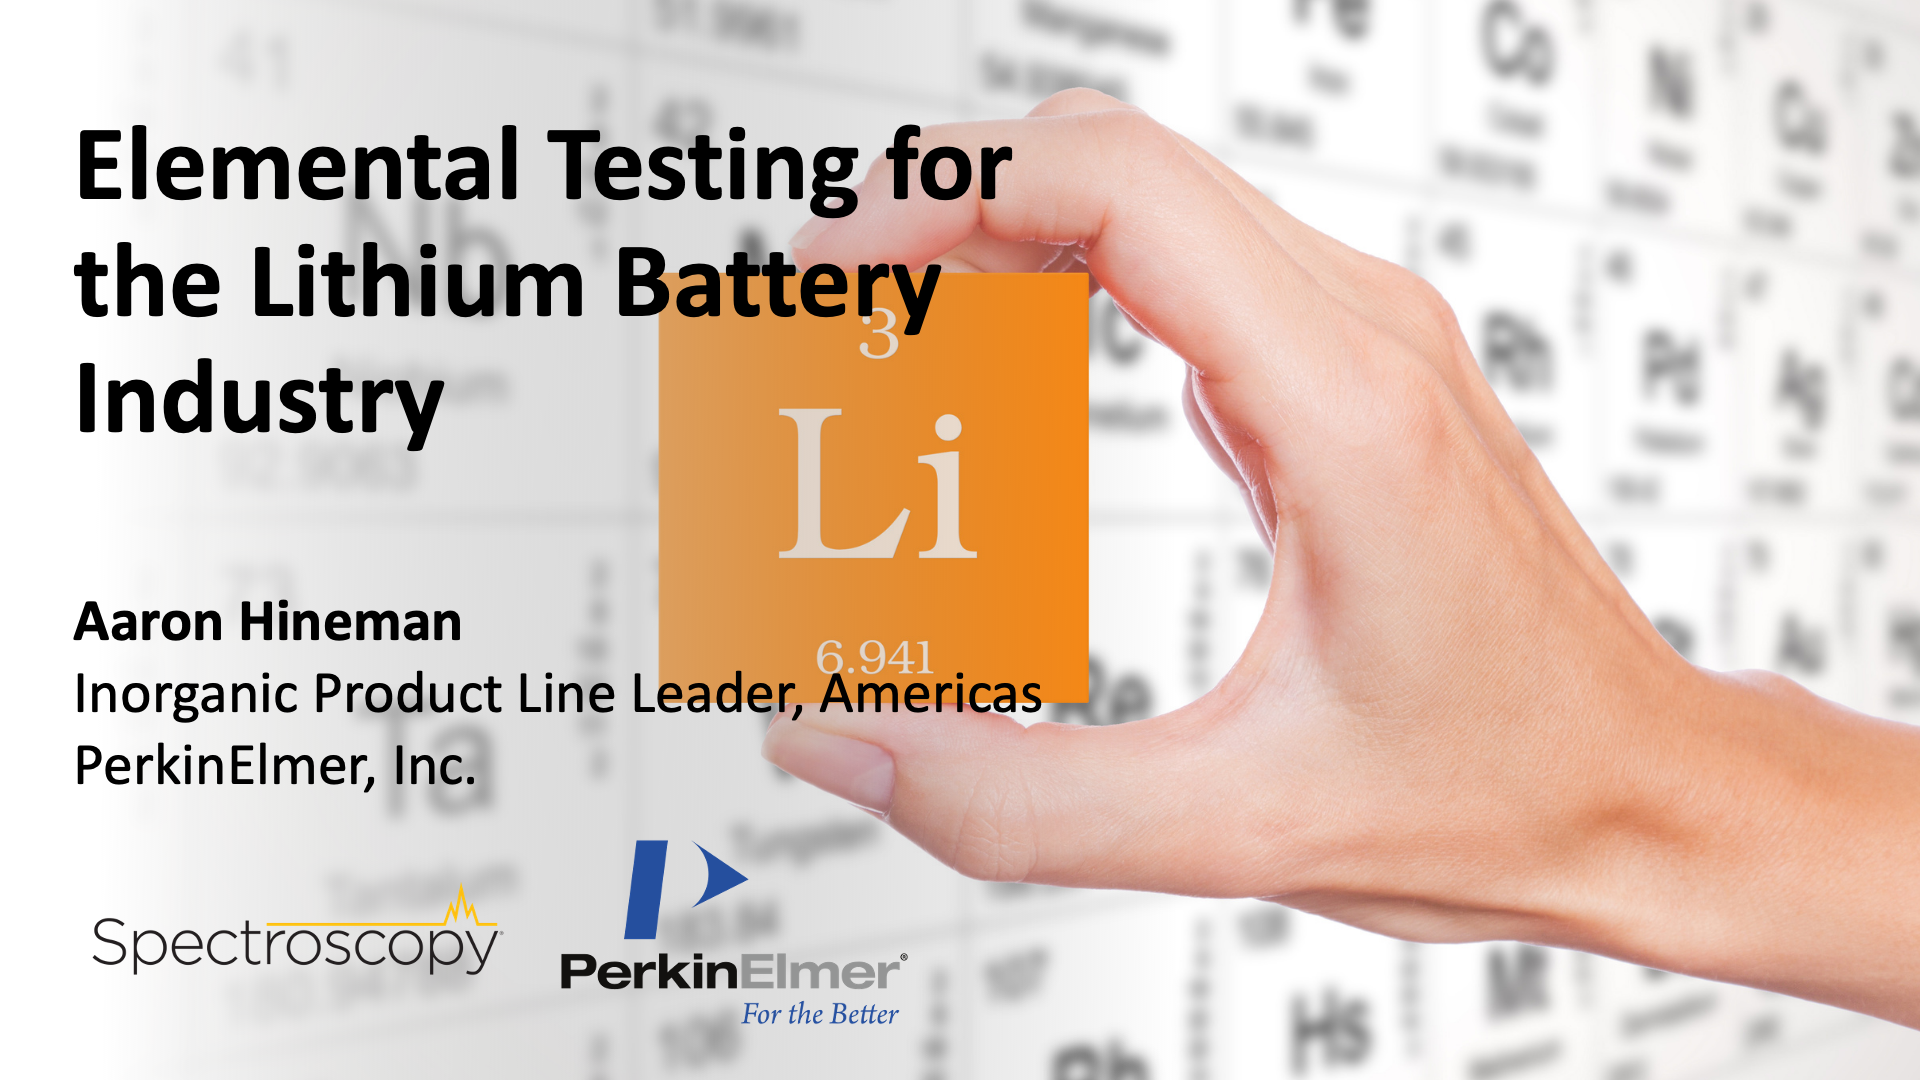 Elemental Testing for the Lithium Battery Industry